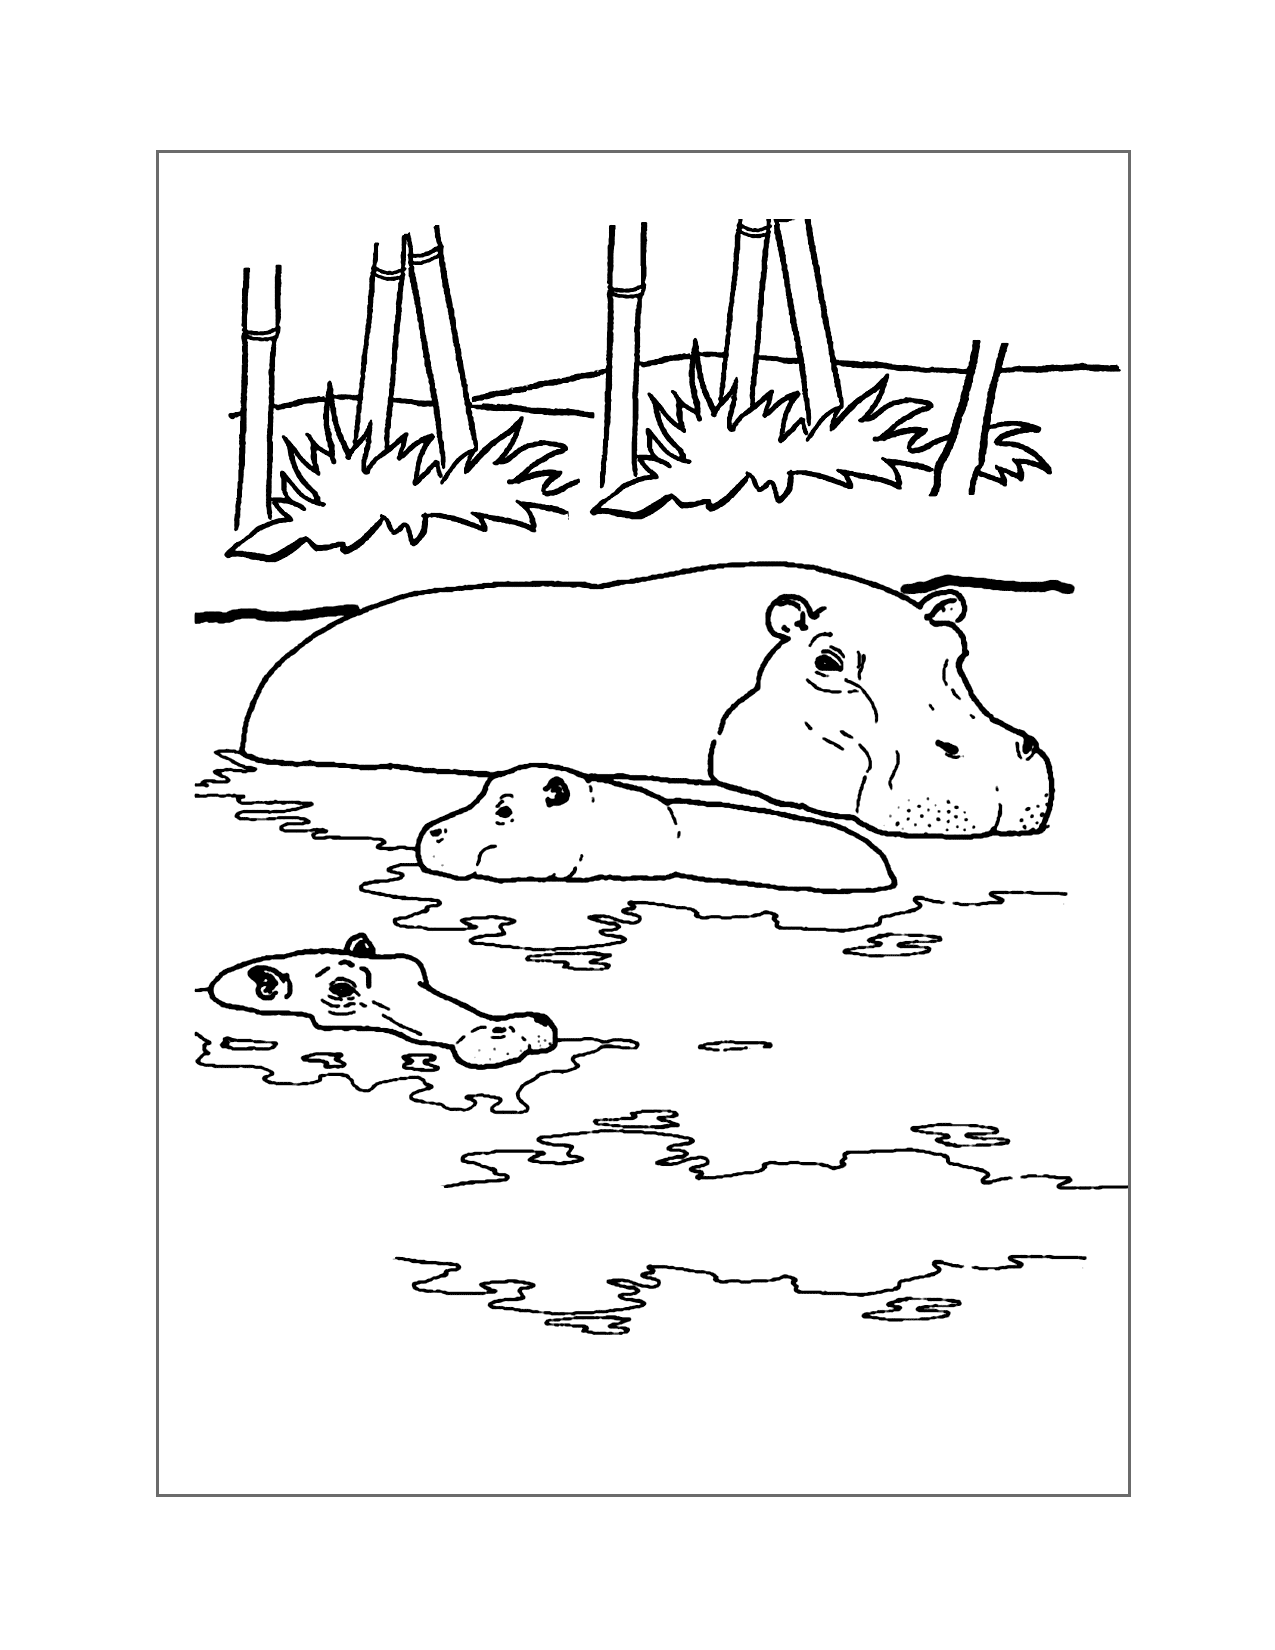 Swimming Hippos Coloring Page